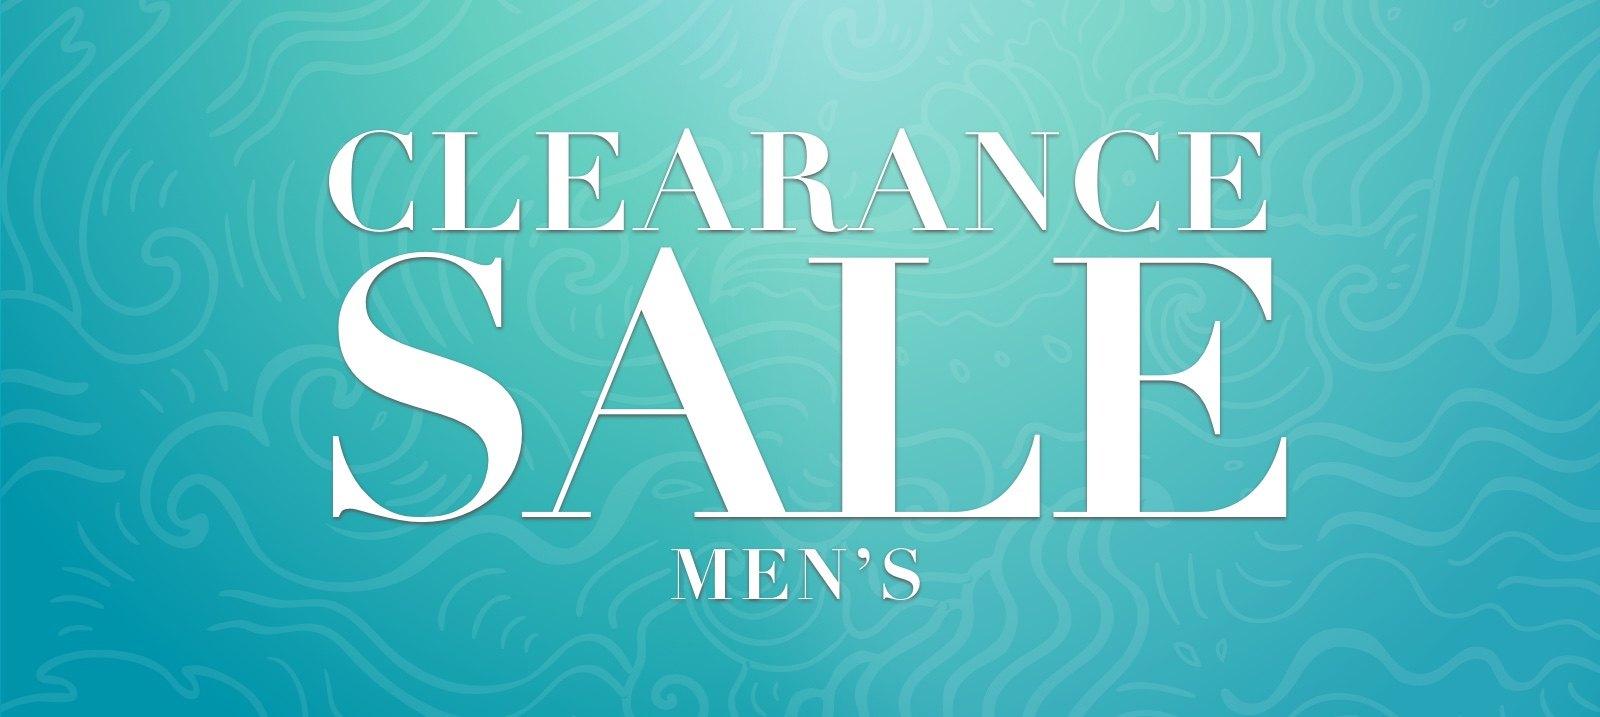 Men's Clearance